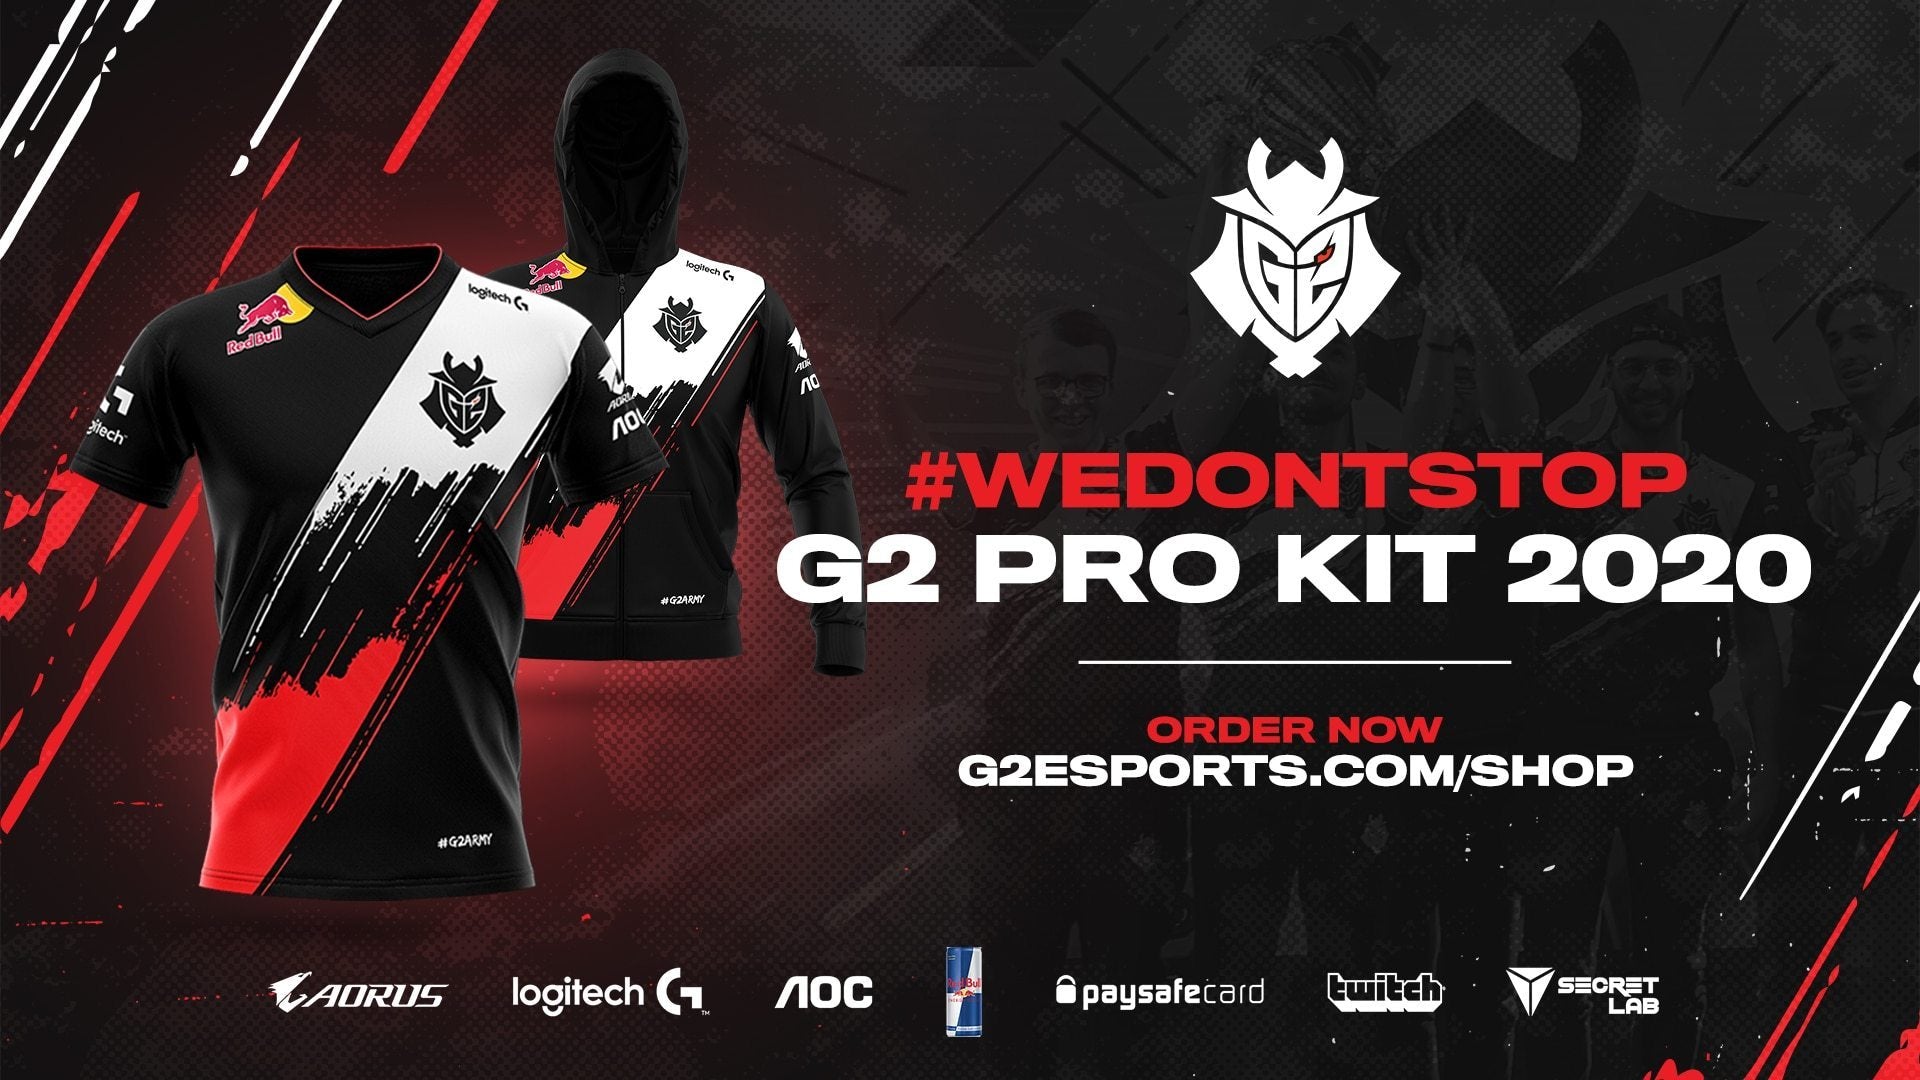 We Don’t Stop - Presenting The G2 Esports 2020 Pro Kit Design